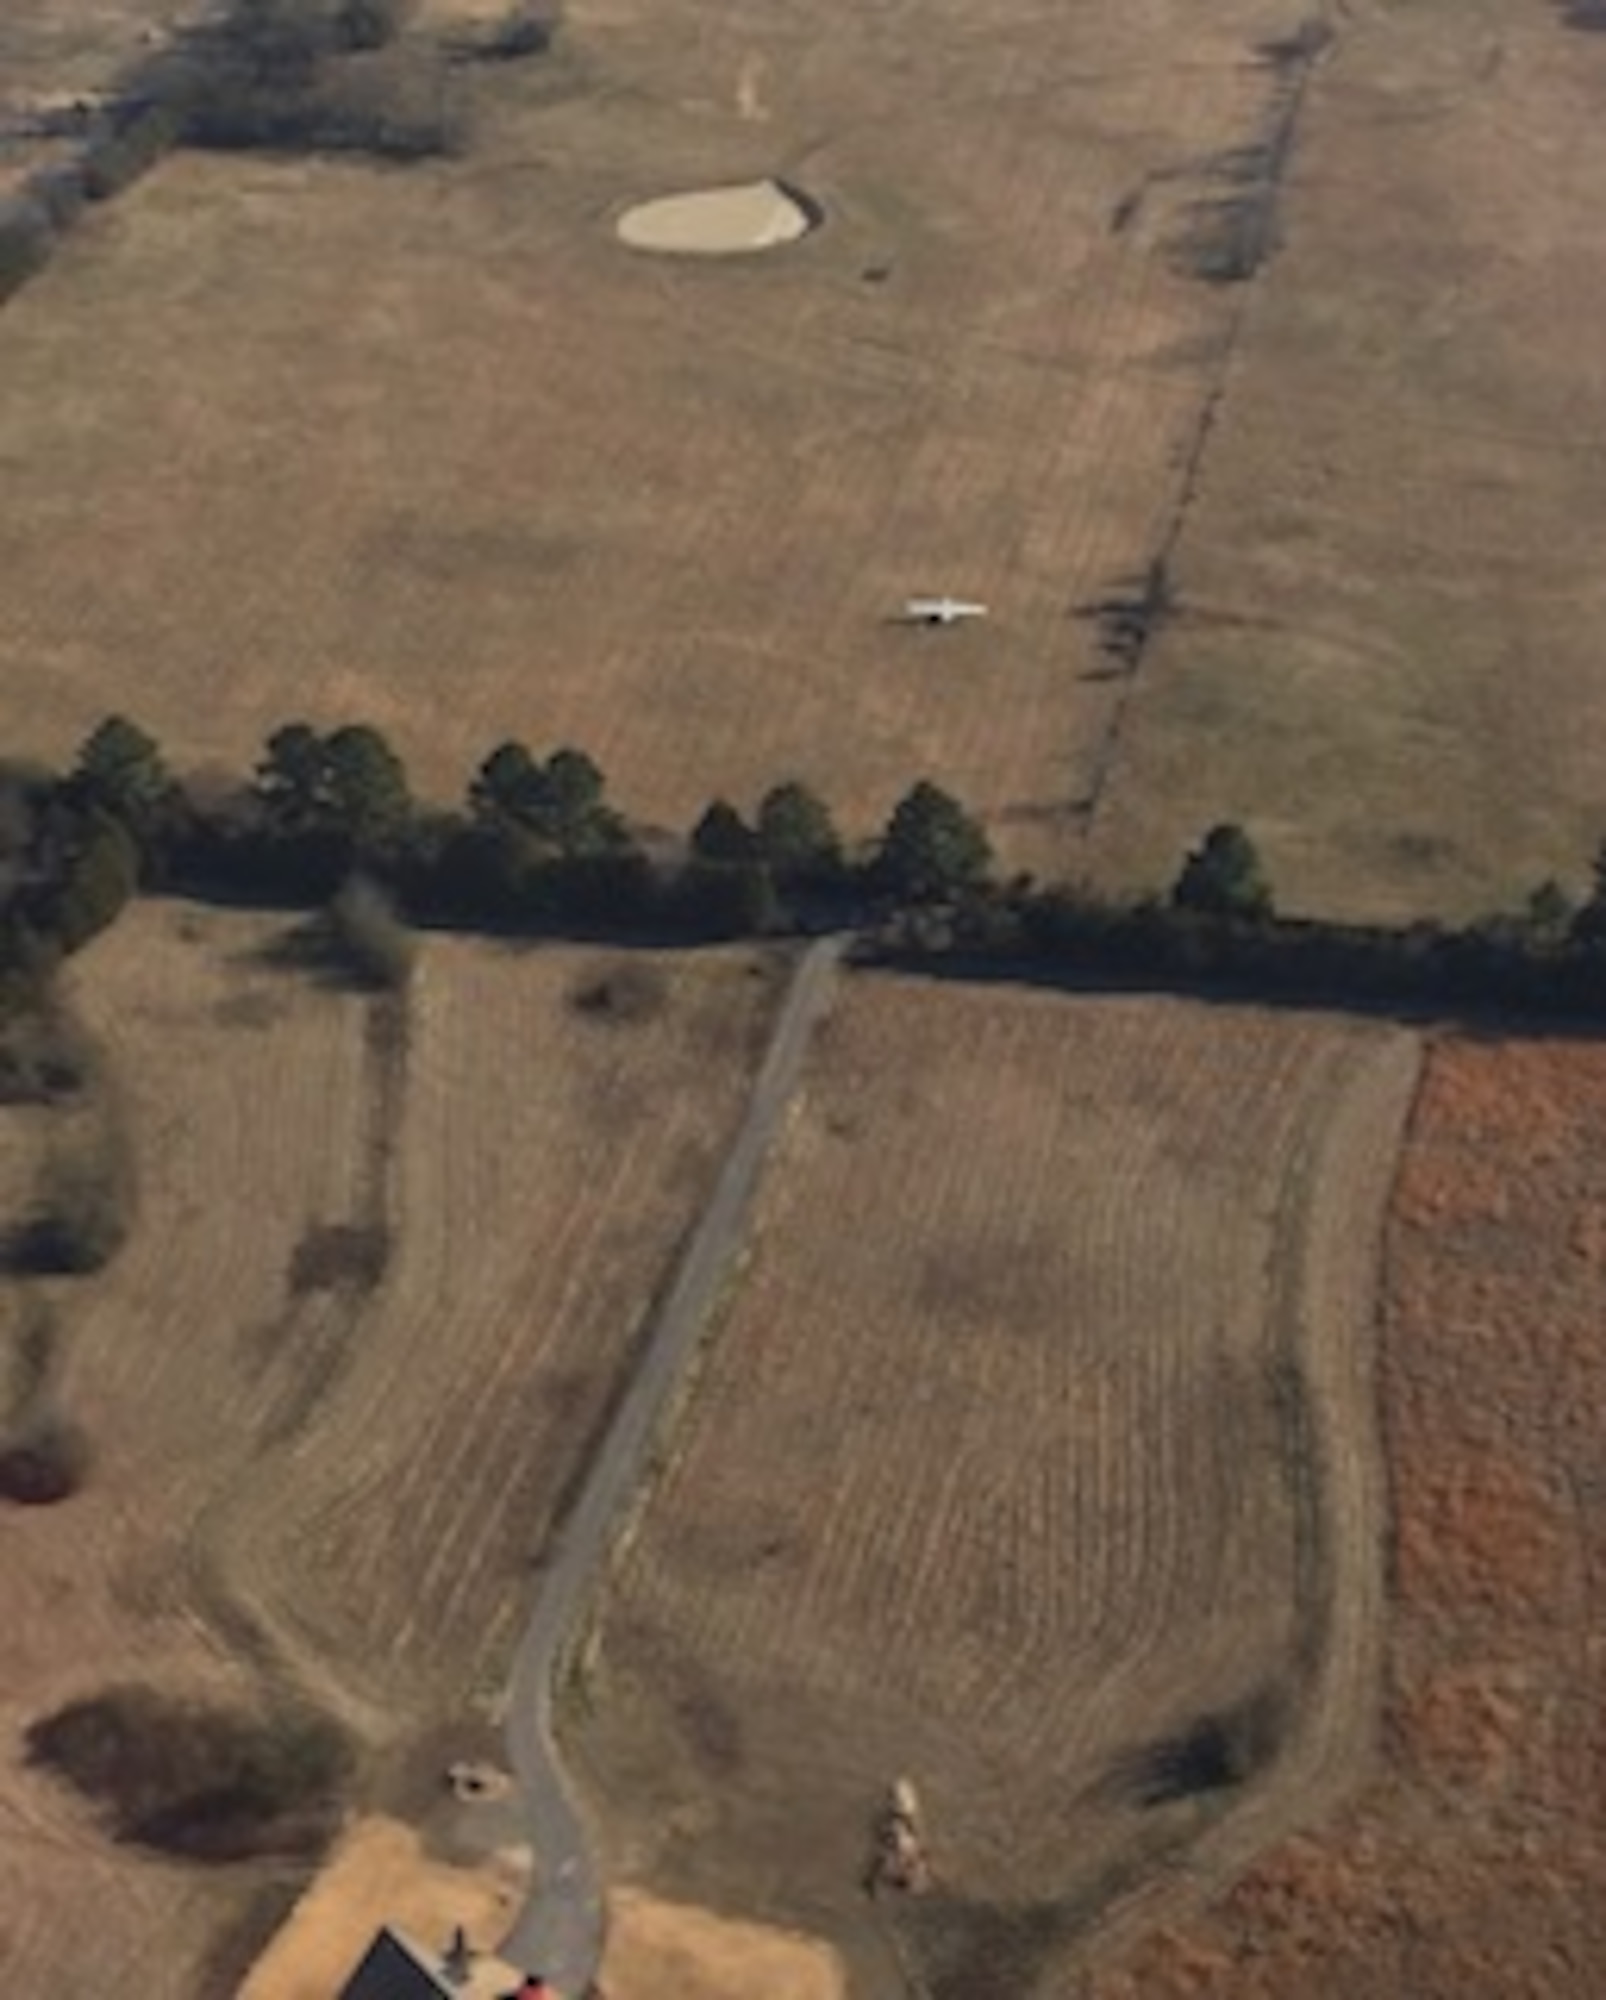 Single engine white Cessna aircraft in the middle of a field as taken from 1500 feet above it.